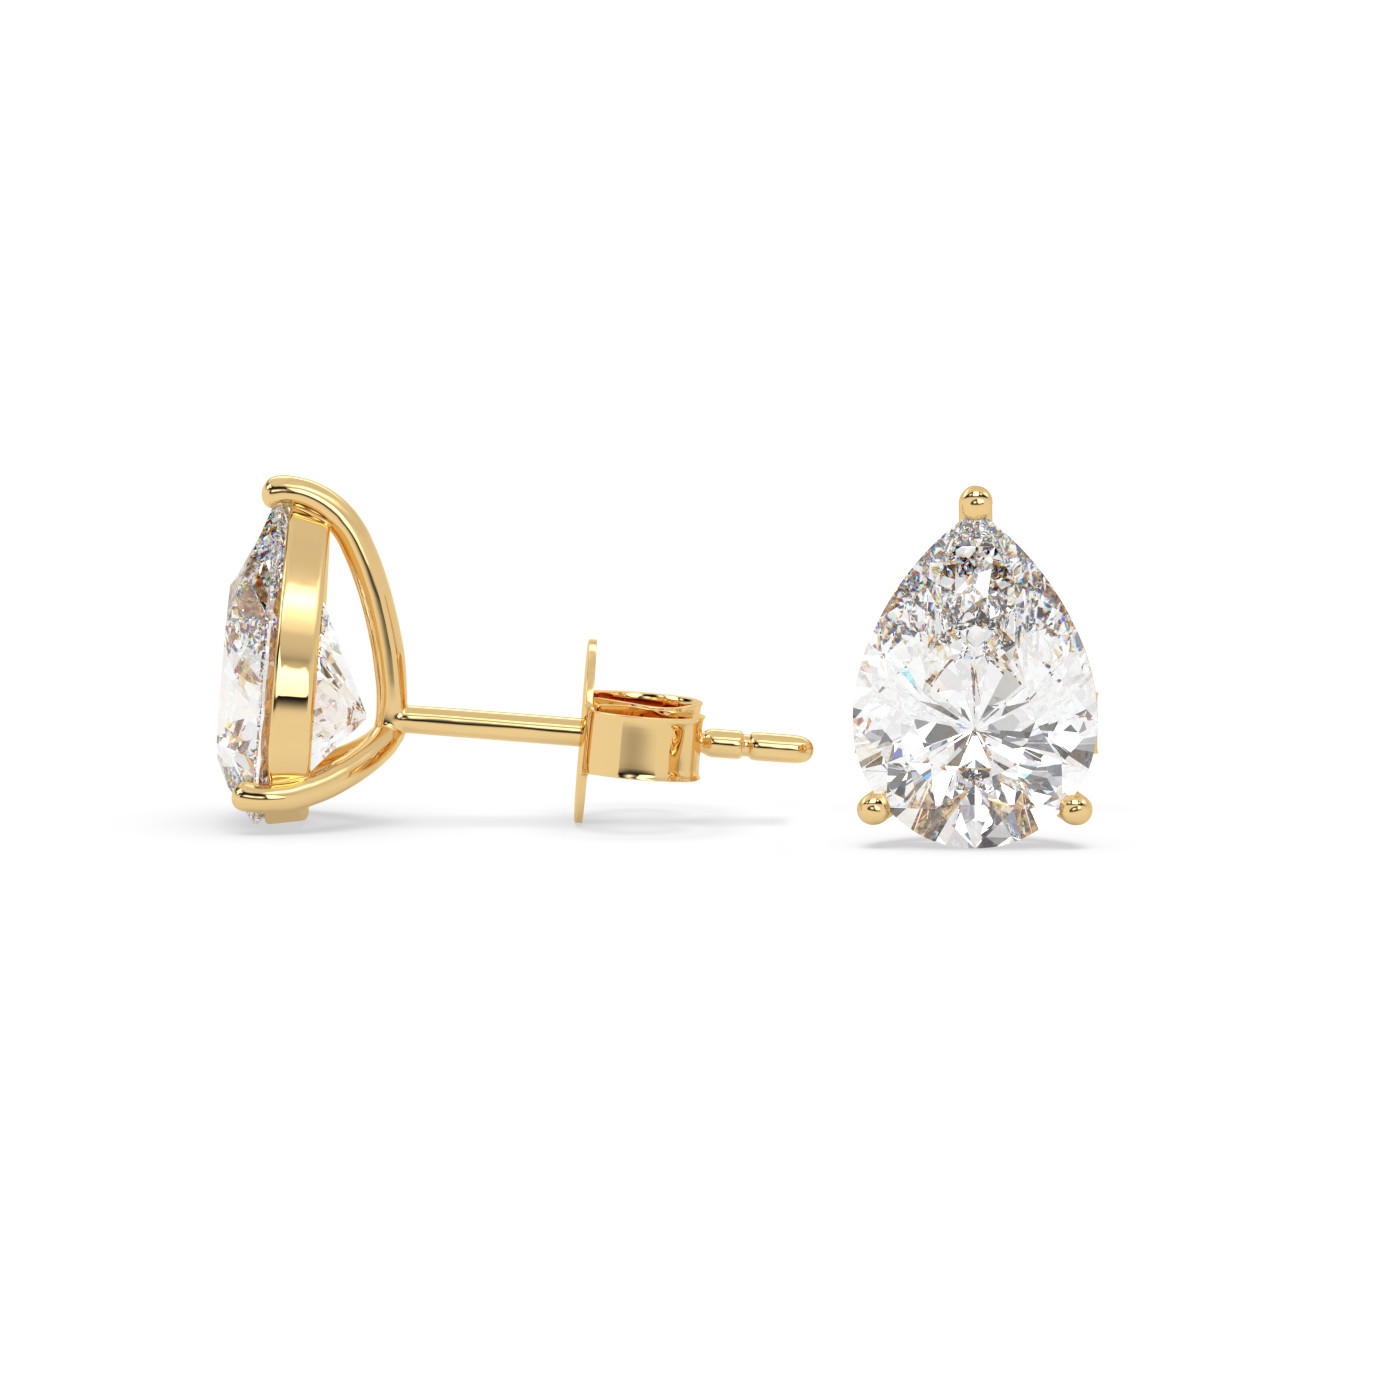 18k yellow gold  1.4 carat pear stud earrings with butterfly back